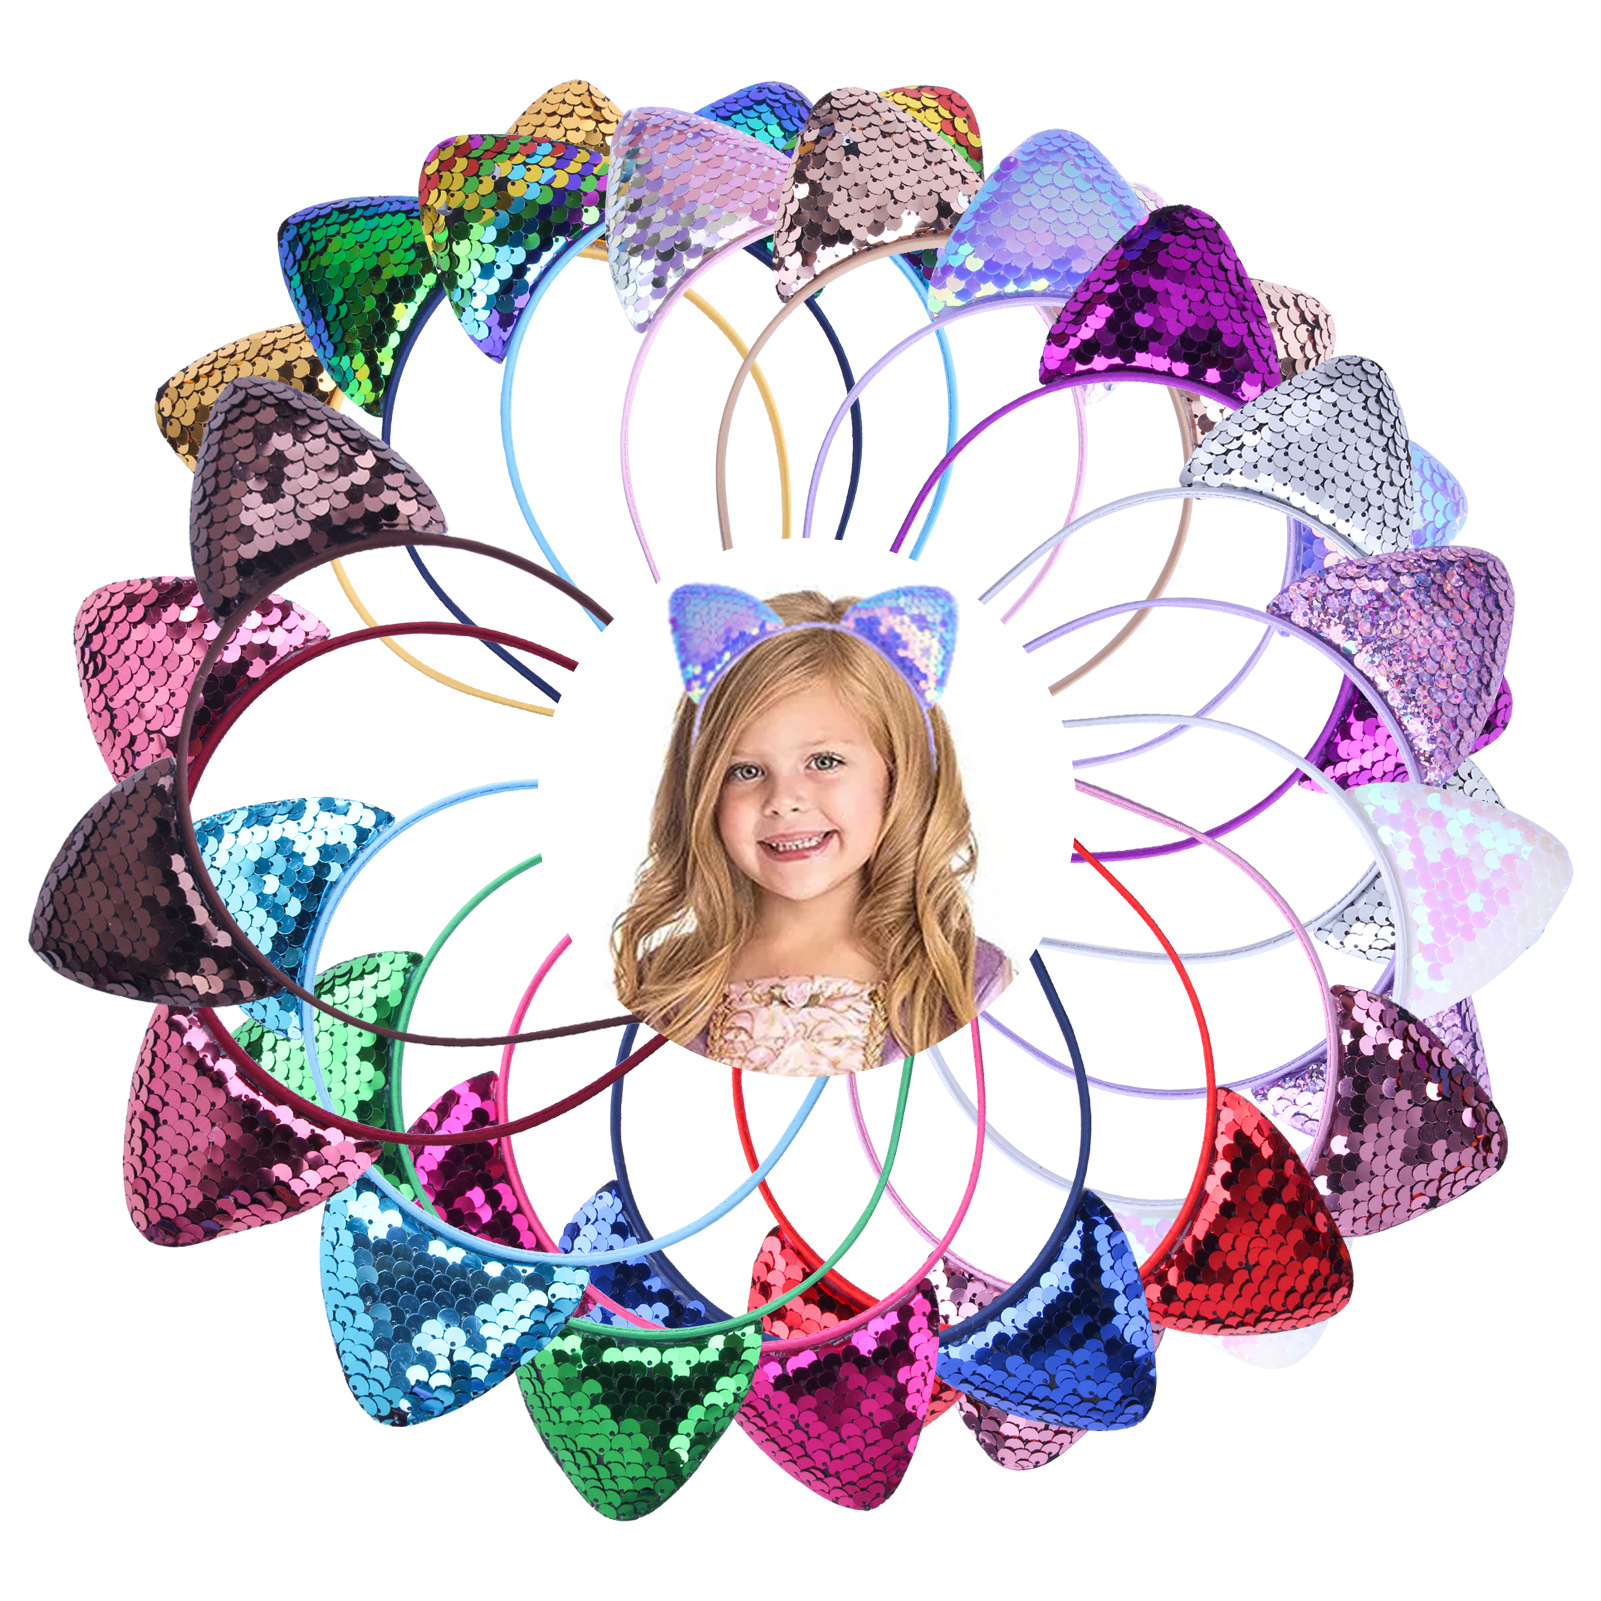 

Fashion Cute Sequins Cat Ears Hair Hoops Headband For Girls Kids Hairbands Head Band Baby Toddler Accessories Headwear Children, Mixed colors or remark